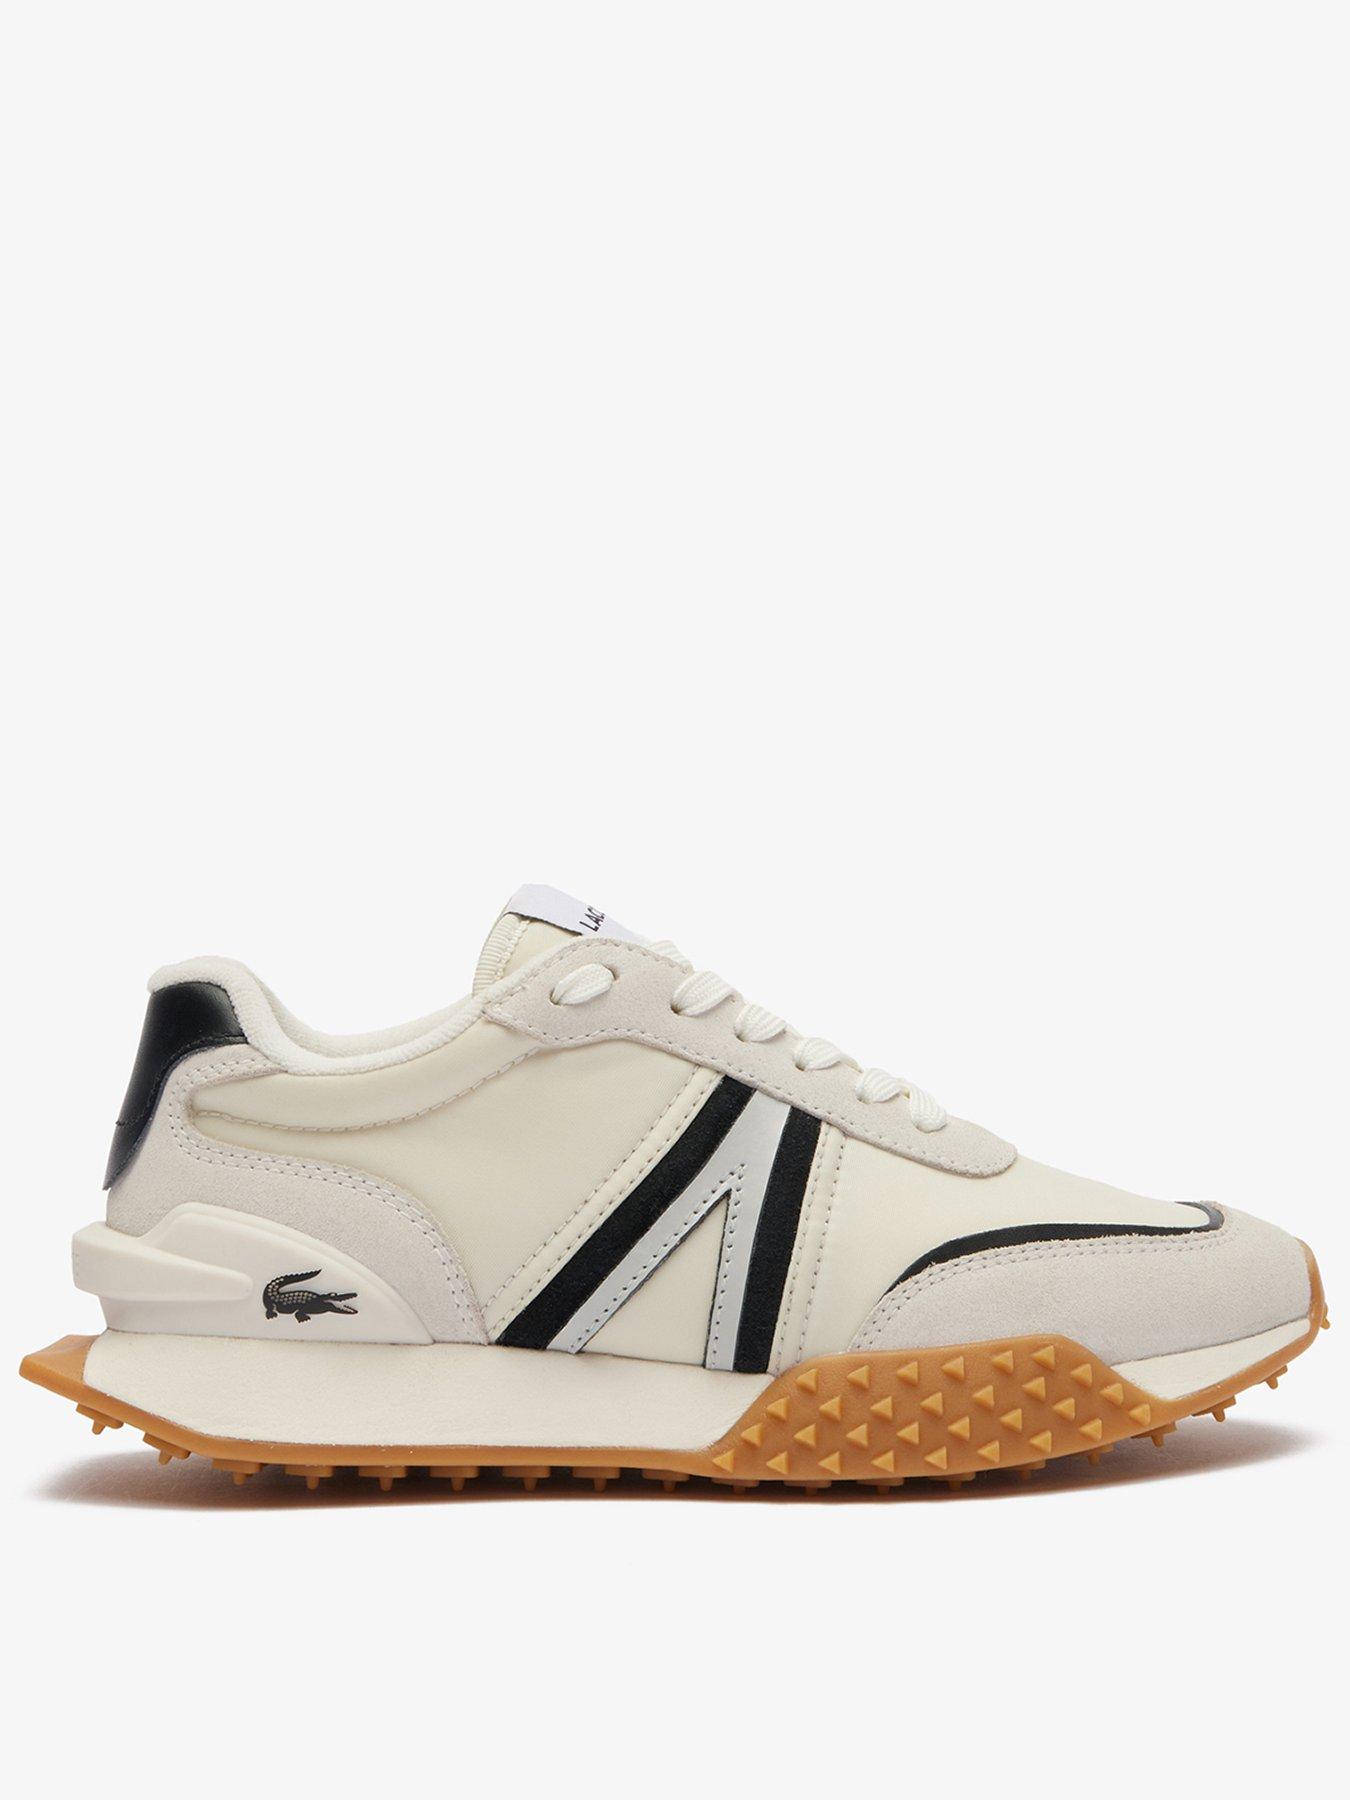 Lacoste L-Spin Deluxe Trainers - White/Black